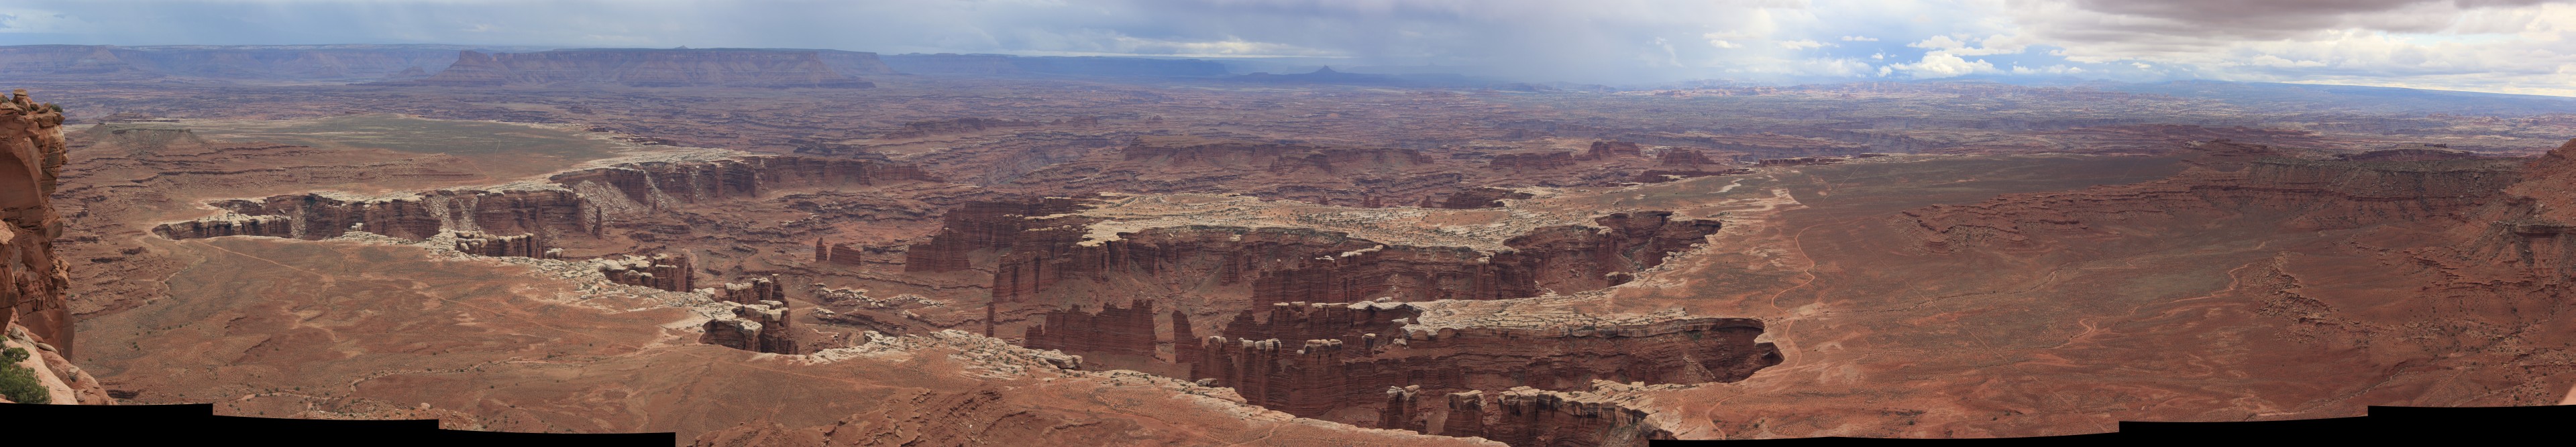 The Green River Branch. Looking northwest into some weather from the 'Island in the Sky' mesa. The Green River cannot be seen but rather this area is just a set of erosion features cut through the various steps on the Canyonlands which lead, eventually, to the Green River.